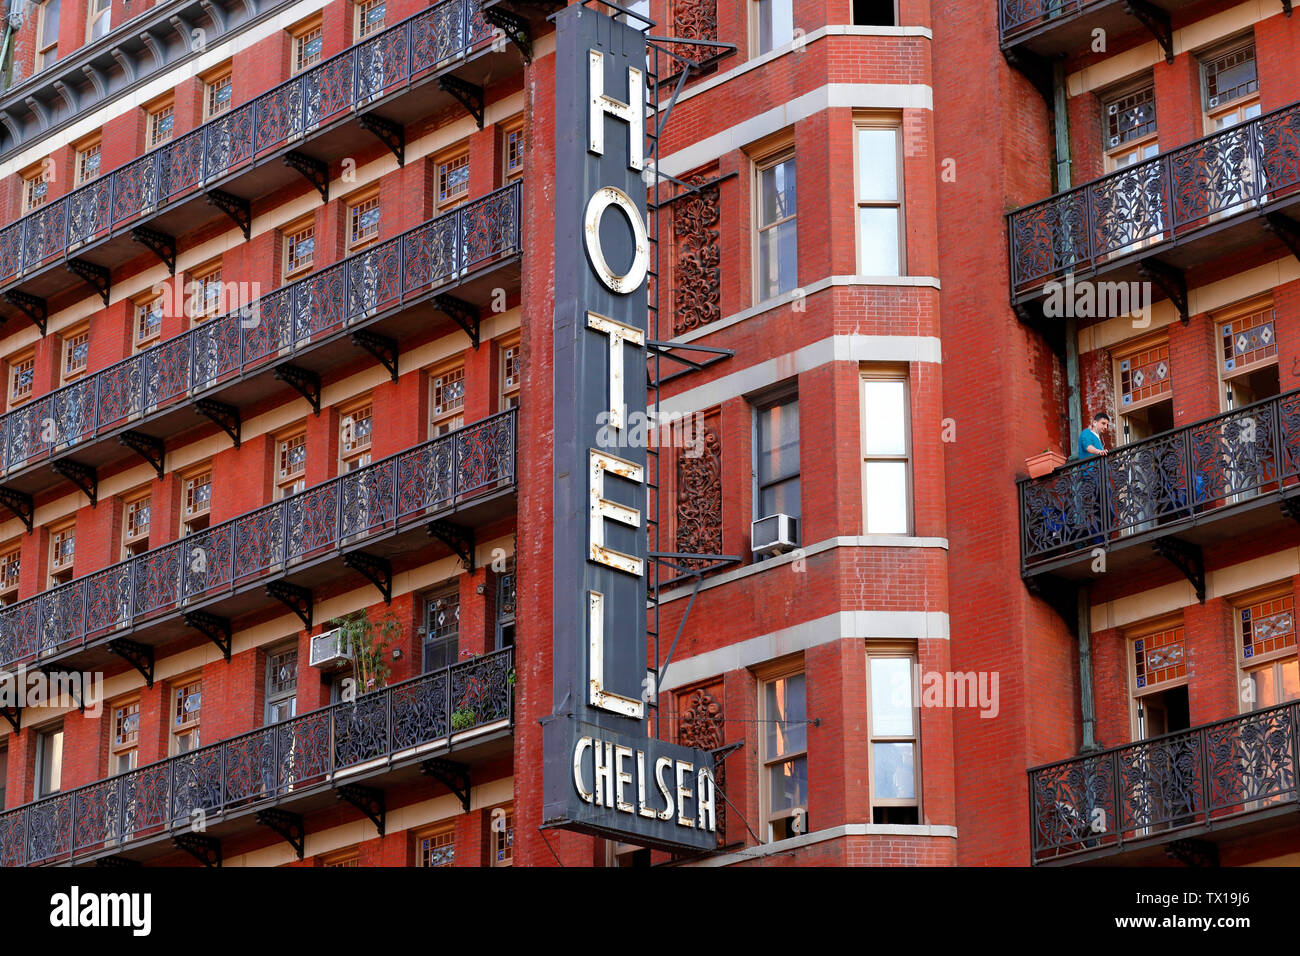 Facade and iconic sign of the Chelsea Hotel, 222 West 23rd Street, New York, NY Stock Photo